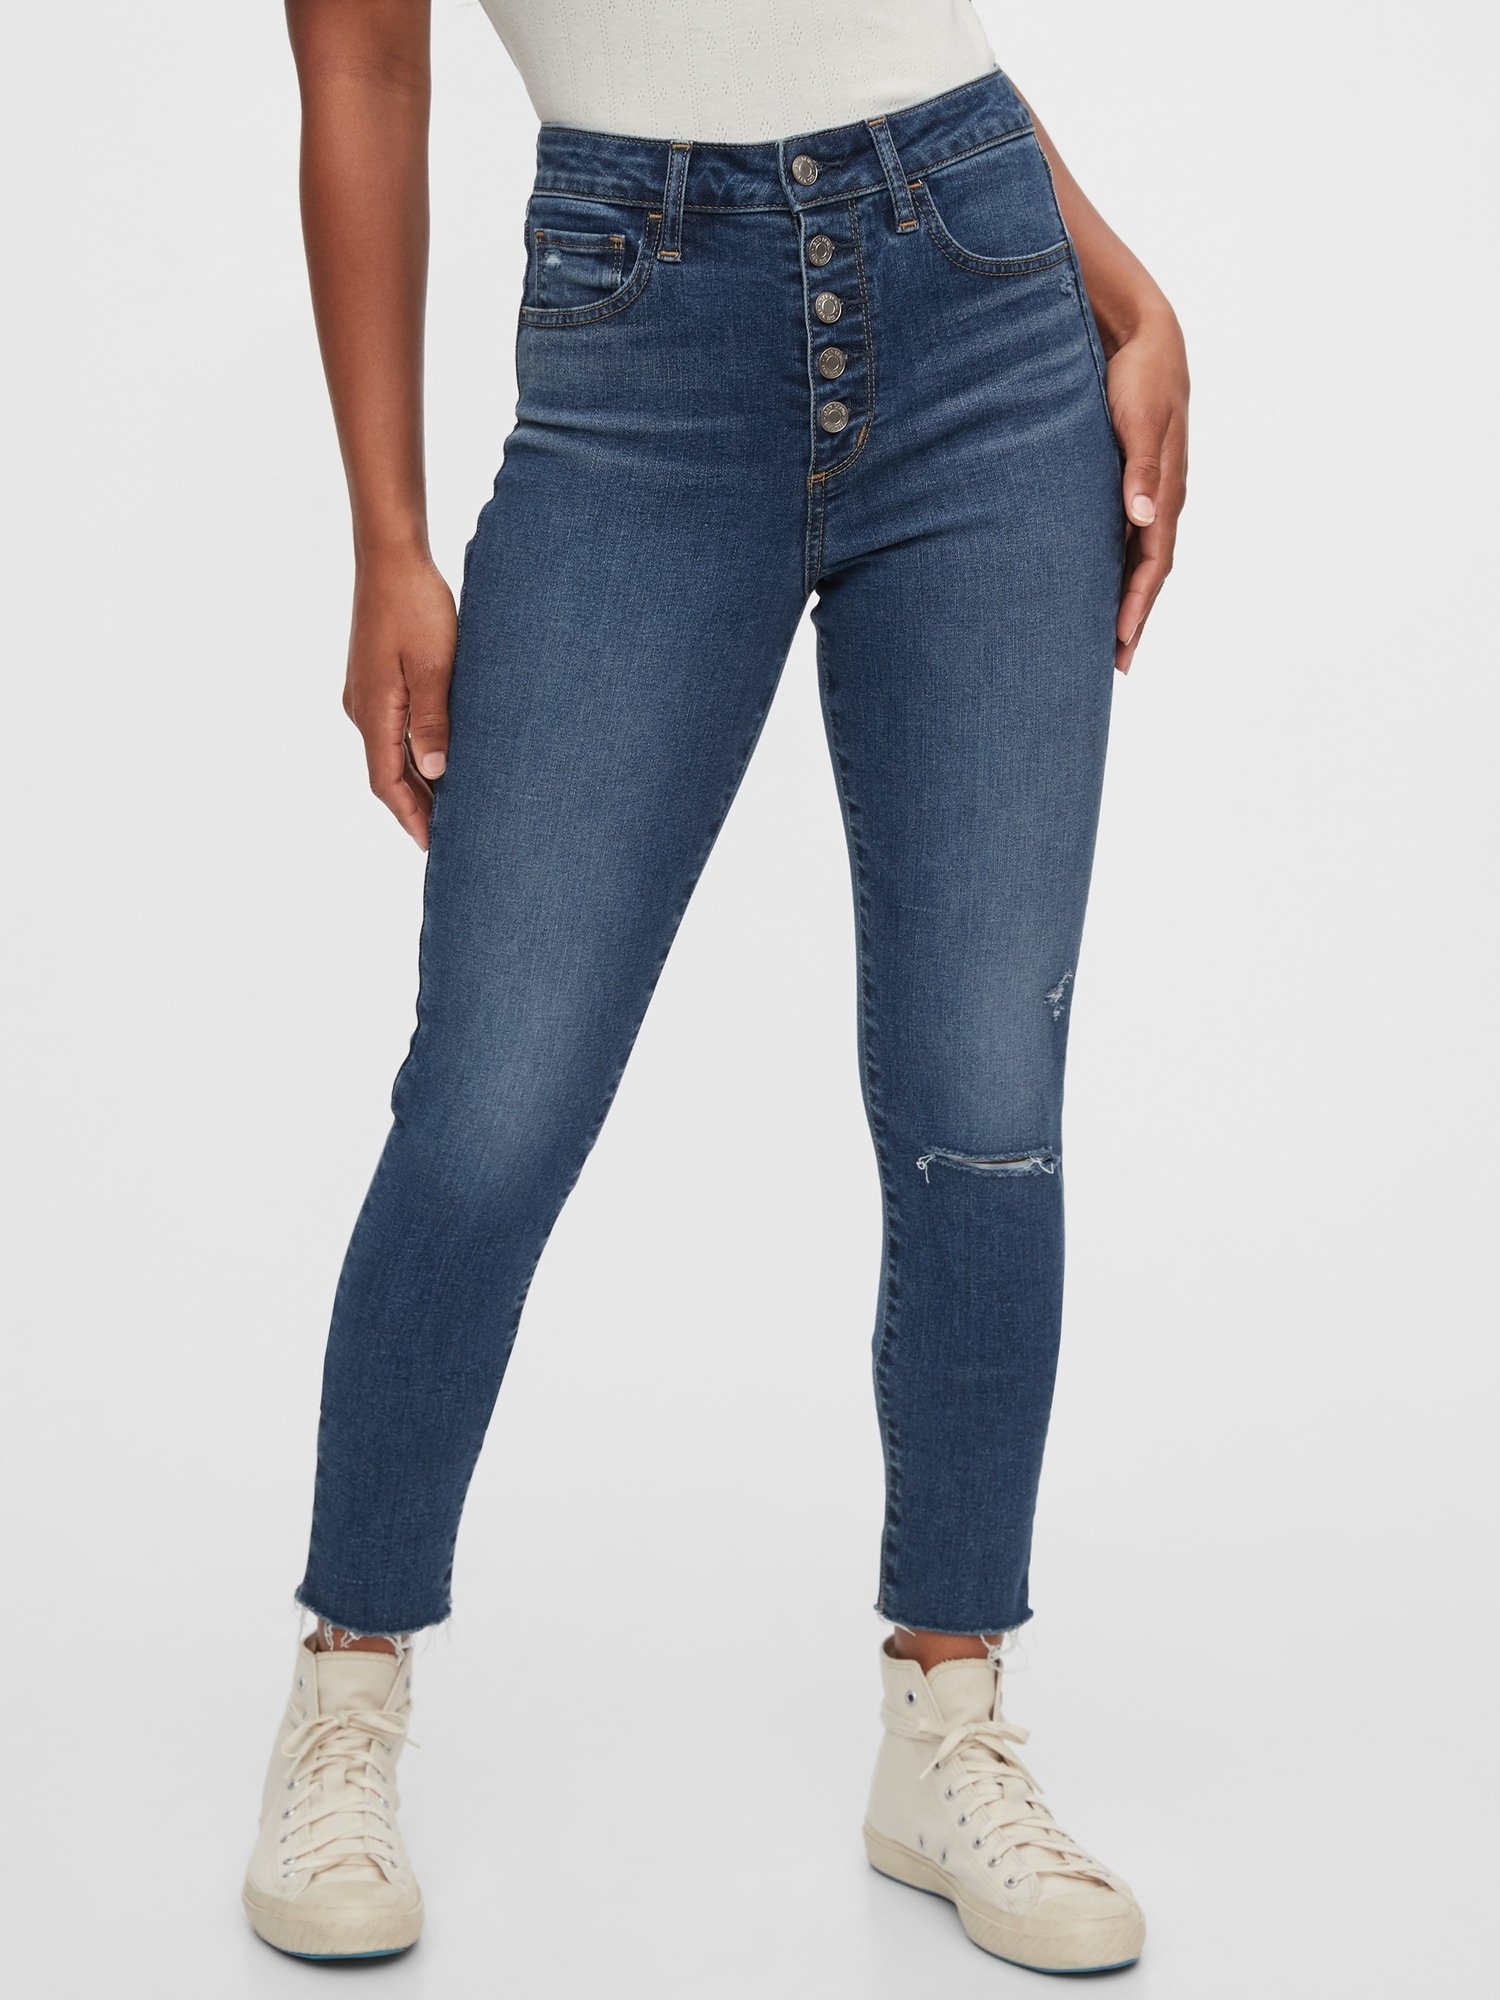 High Rise Distressed Jegging Jean Pantolon product image